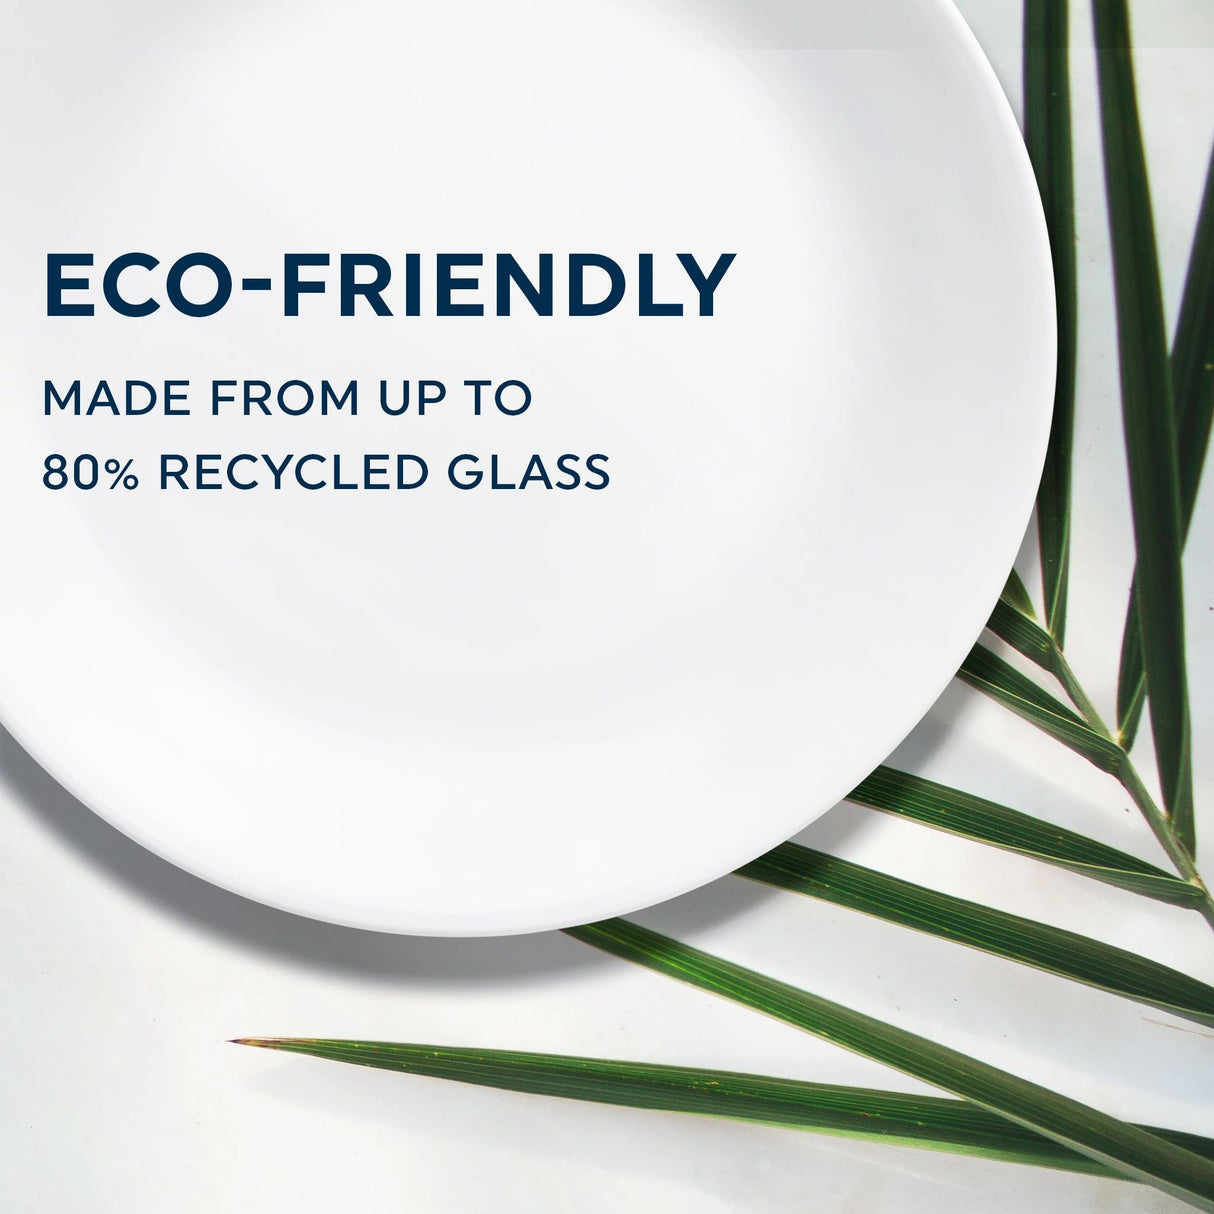  Corelle dinnerplate with text eco-friendly made from up to 80% recycled glass